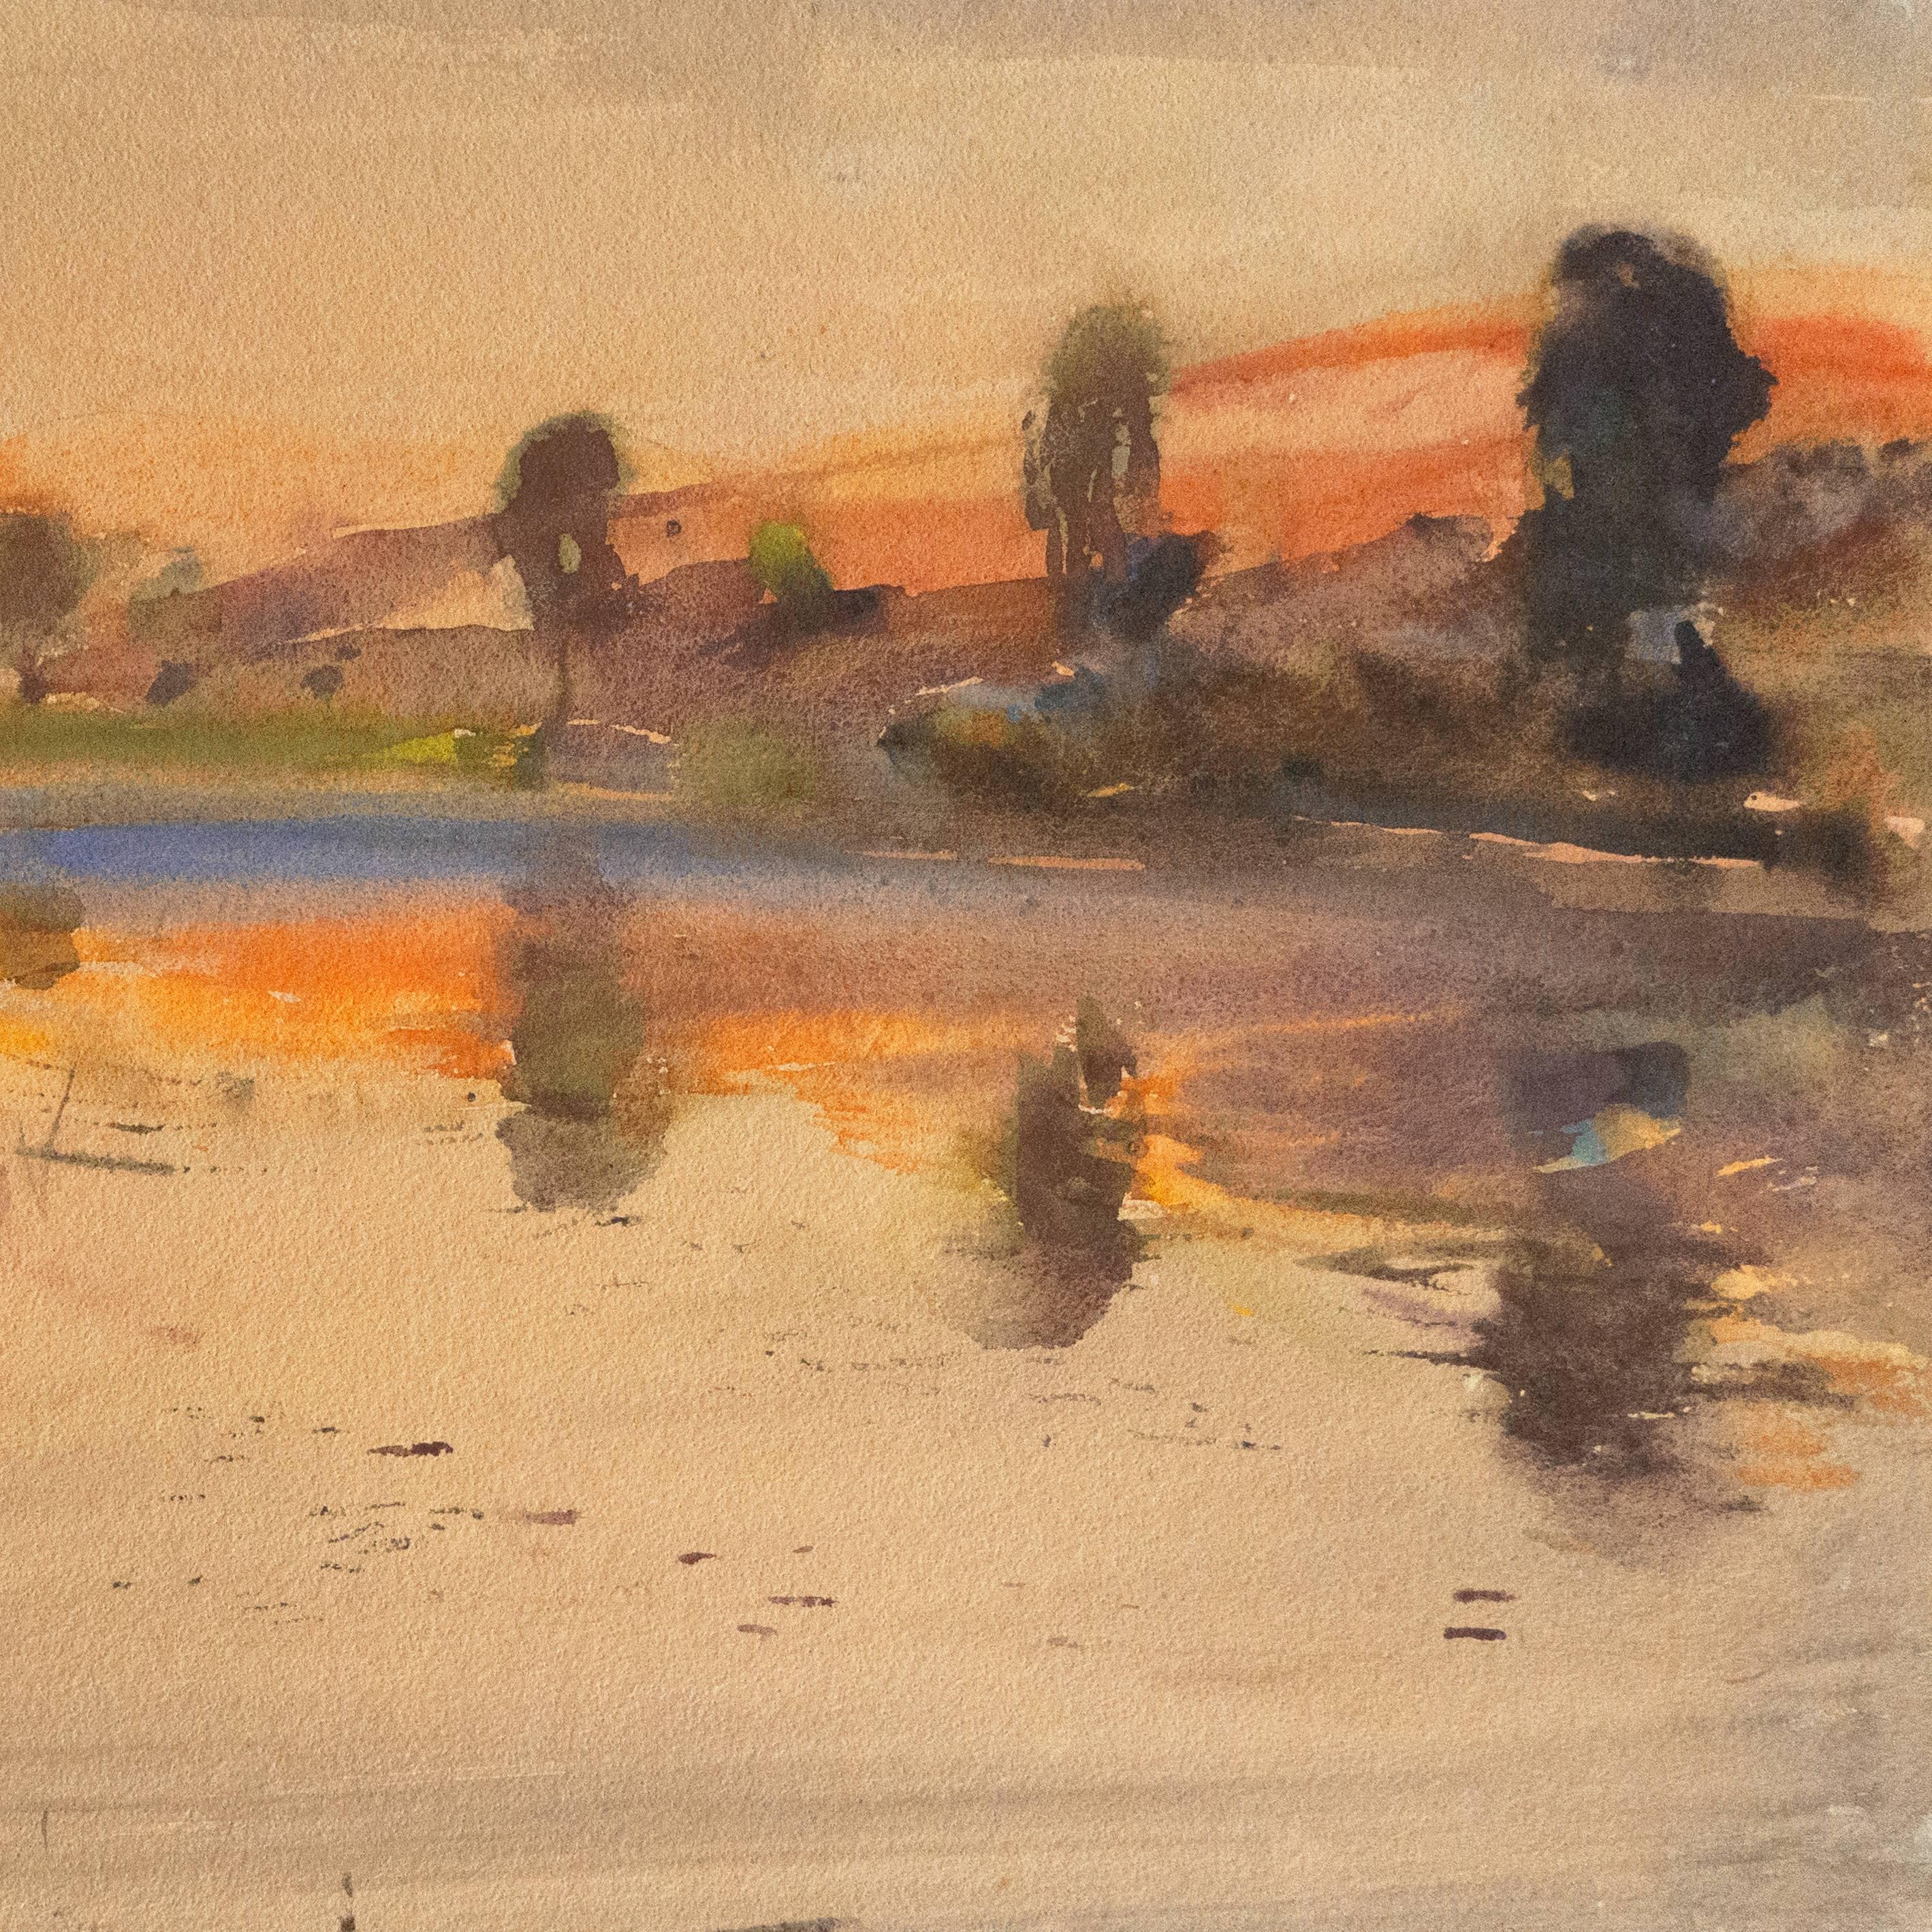 Signed lower left, 'Karl Yens' (American, 1868-1945) and painted circa 1920. 

A fine, early 20th century watercolor landscape showing the the luminous sunset serenely reflected in a still lake with elegant, calligraphic grasses.

Painter,